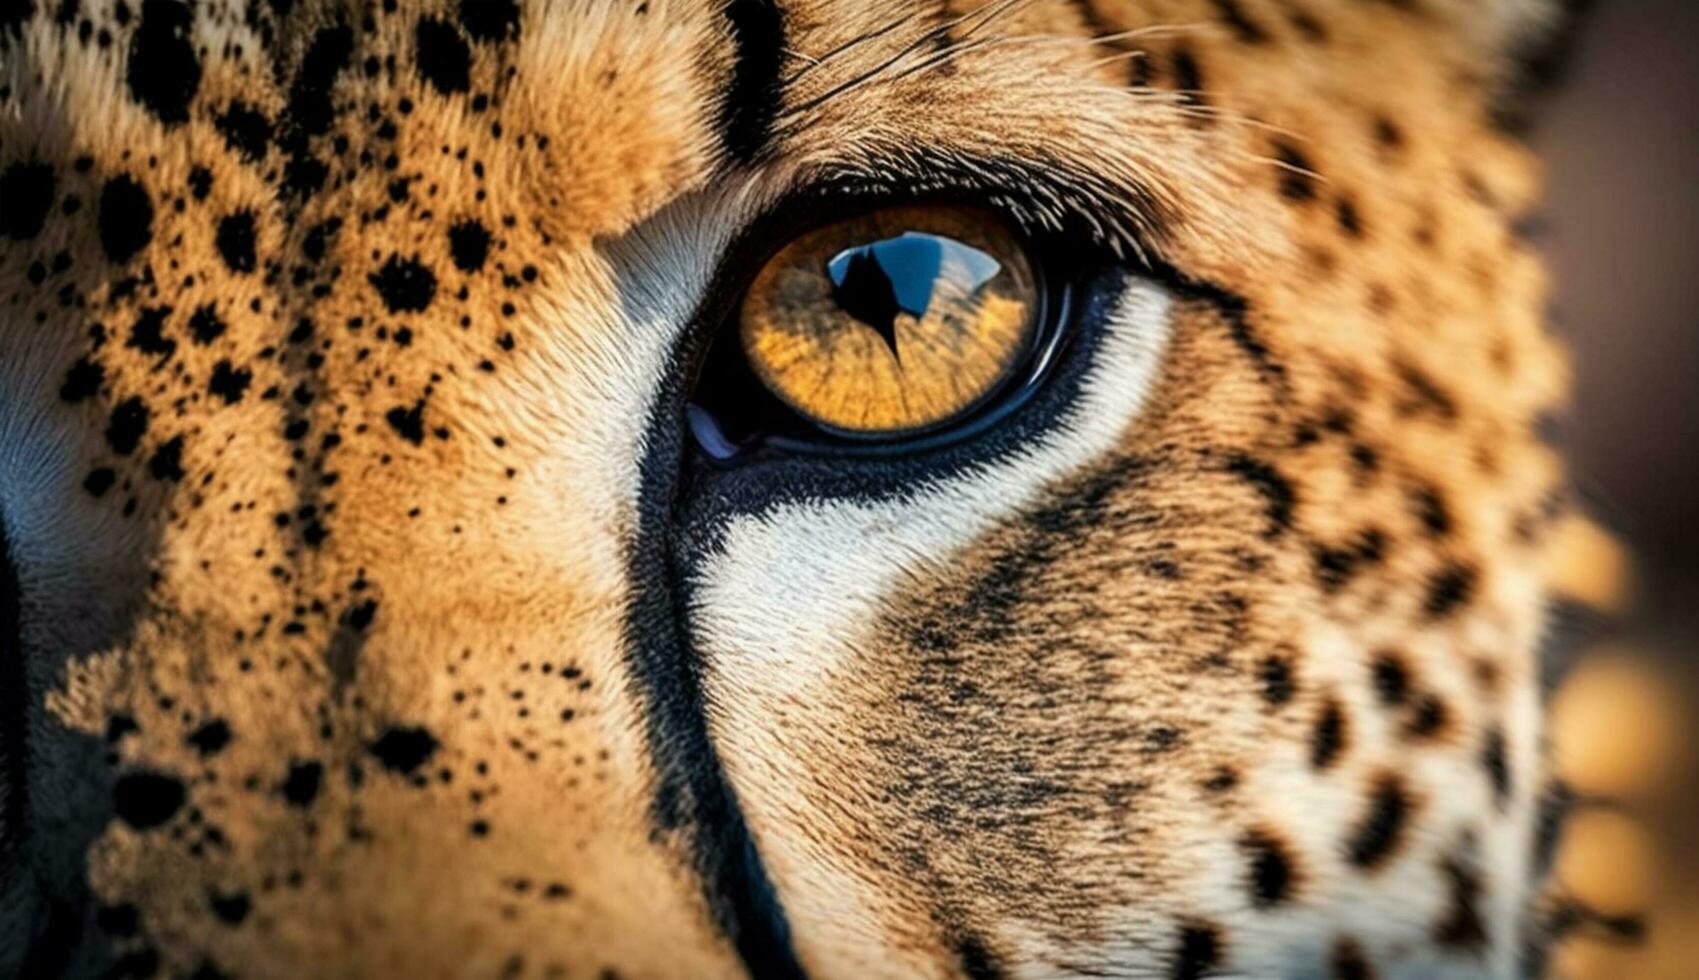 Spotted feline staring beauty of nature wildlife generated by AI photo